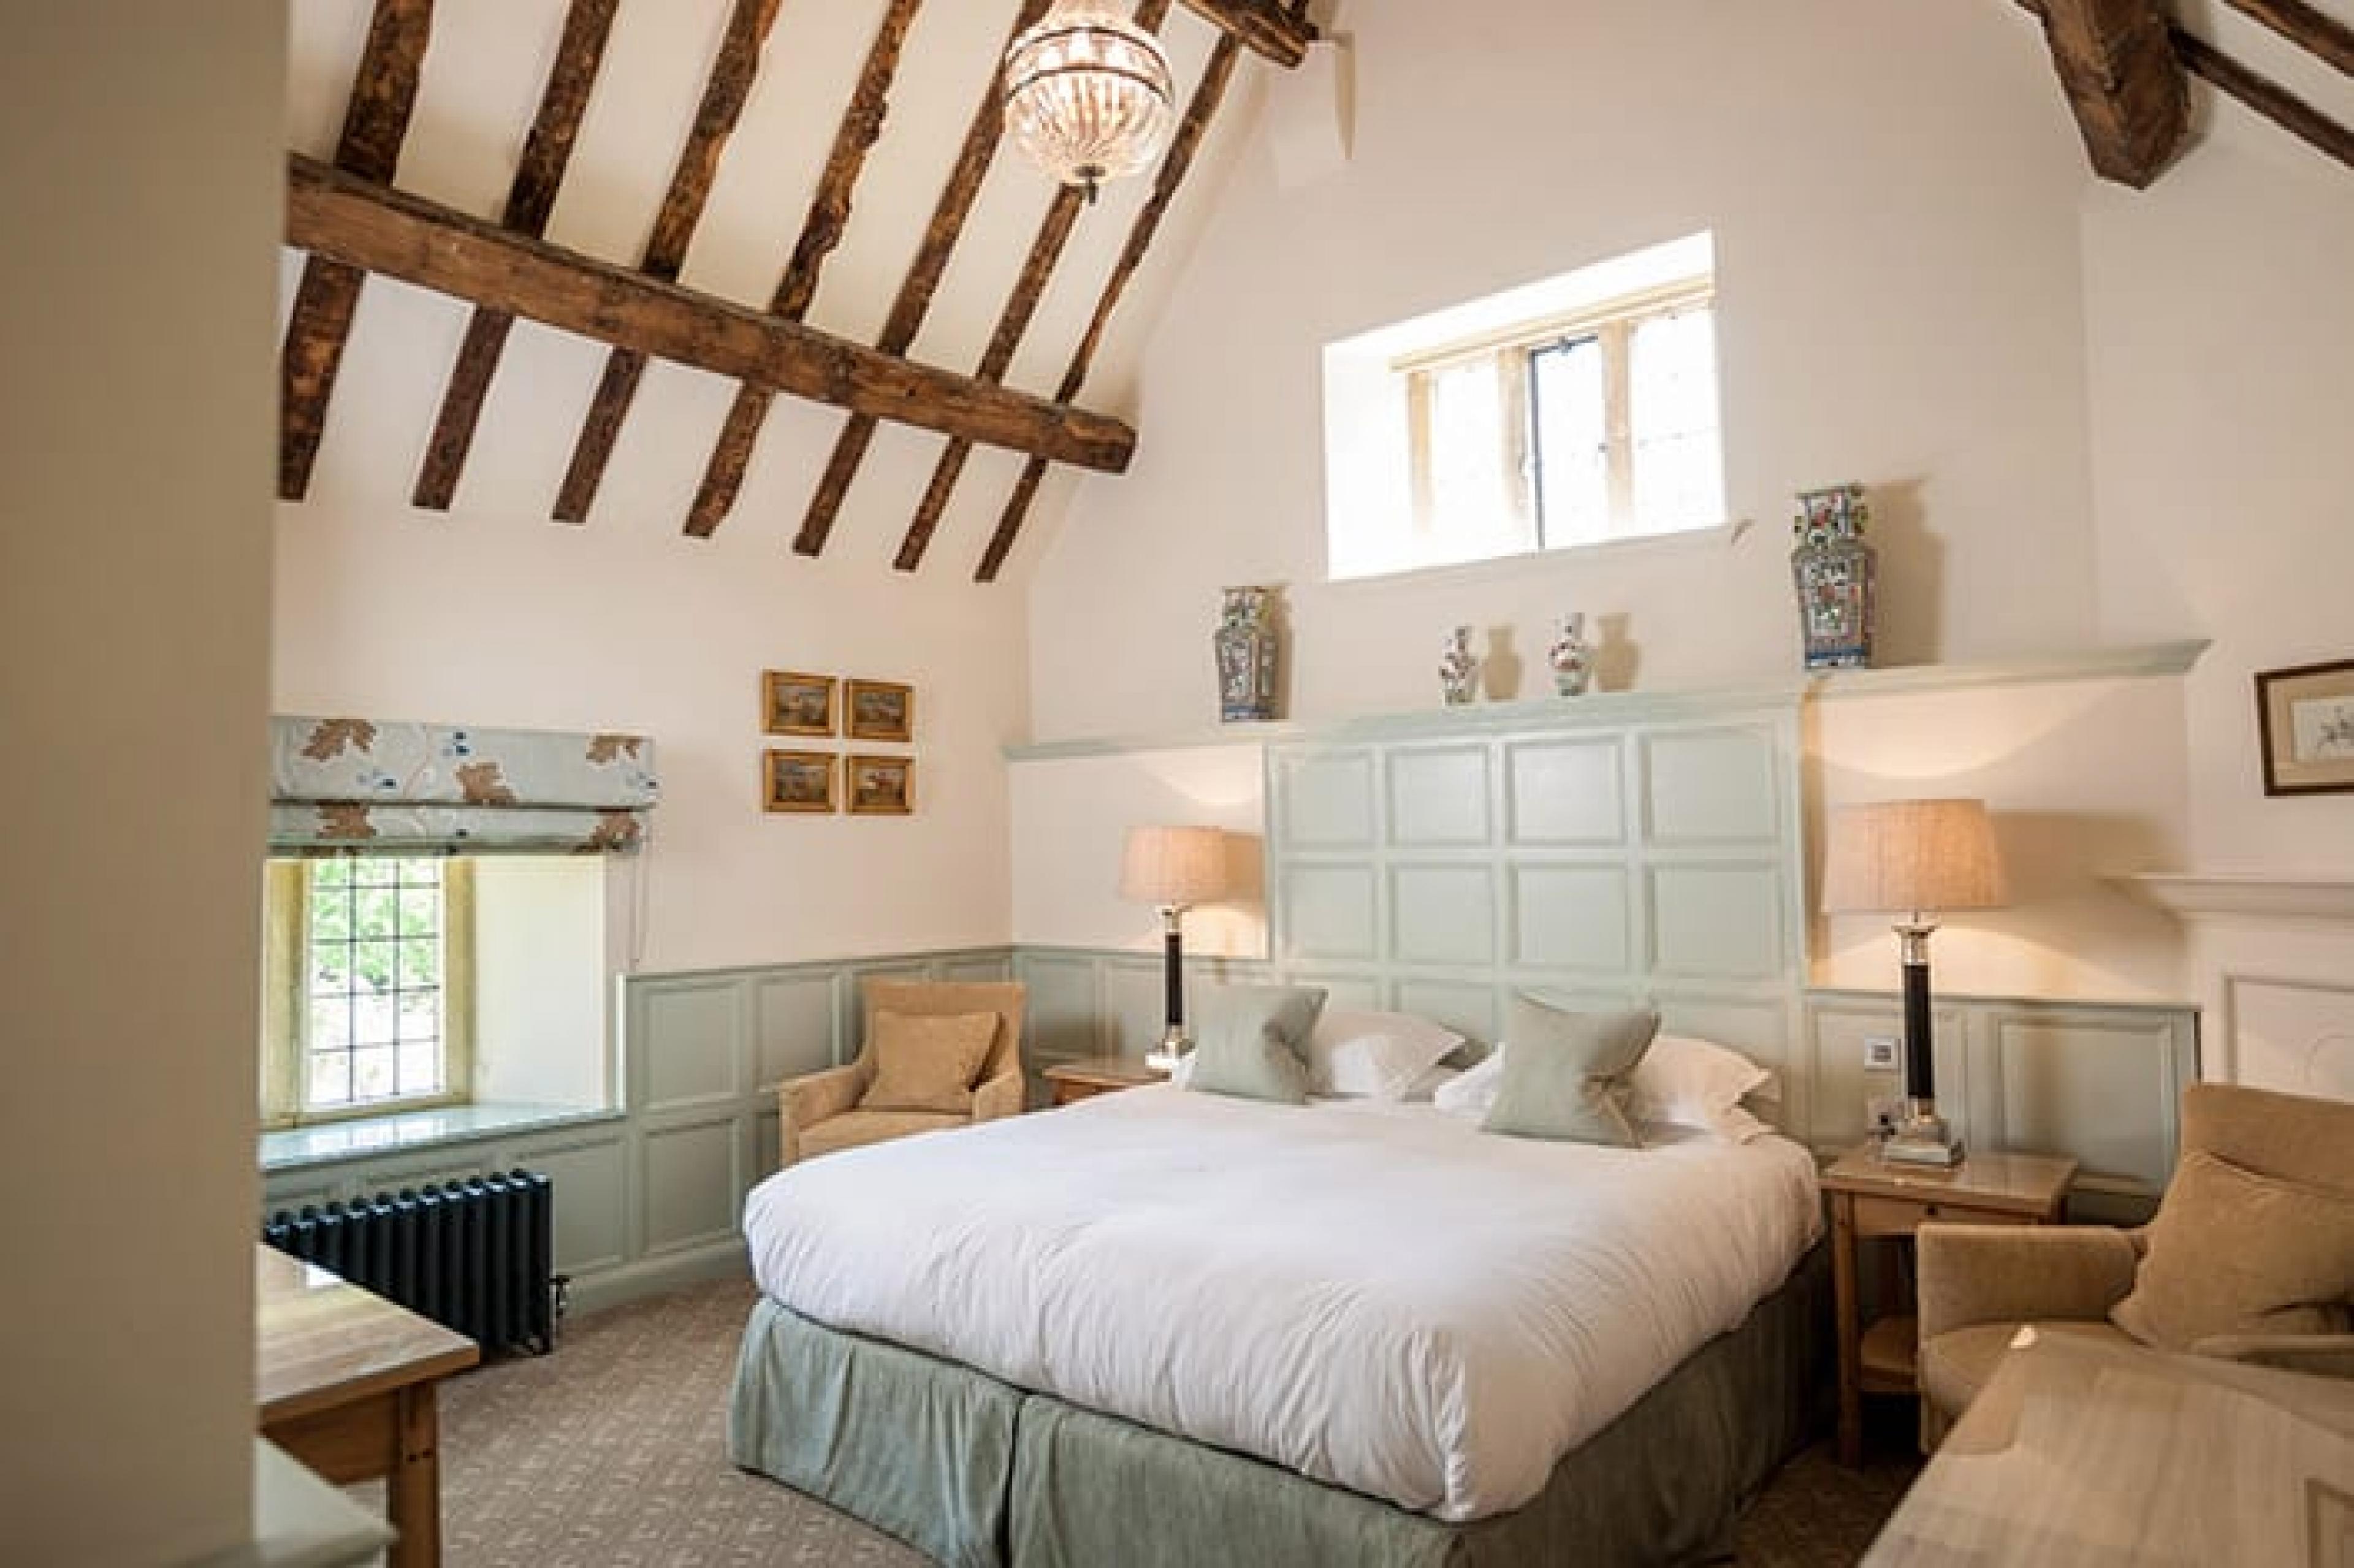 Bedroom at Buckland Manor, Cotswolds, England